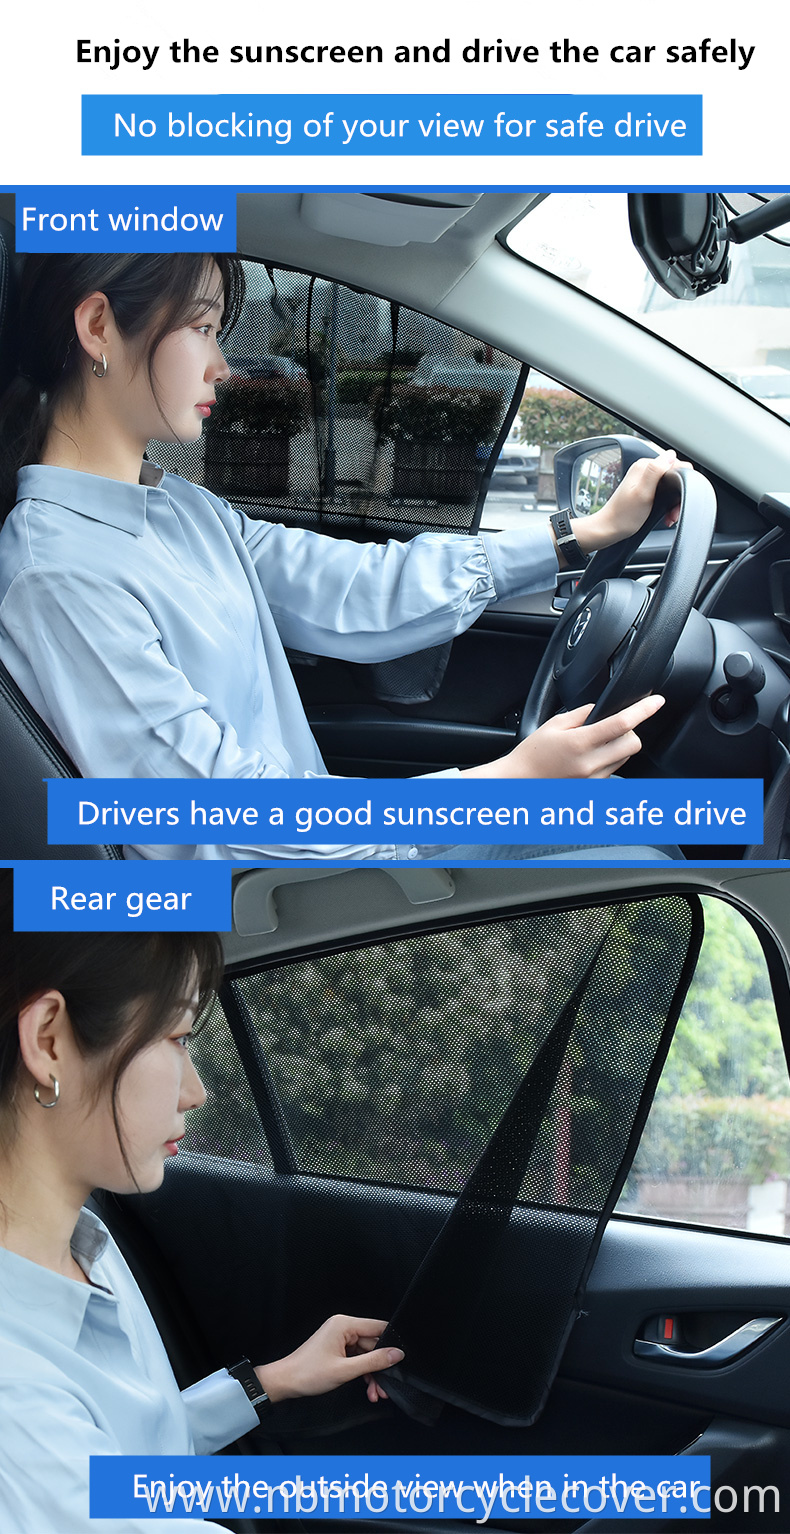 New customized design polyester mesh magnetic best hight quality sunshade car